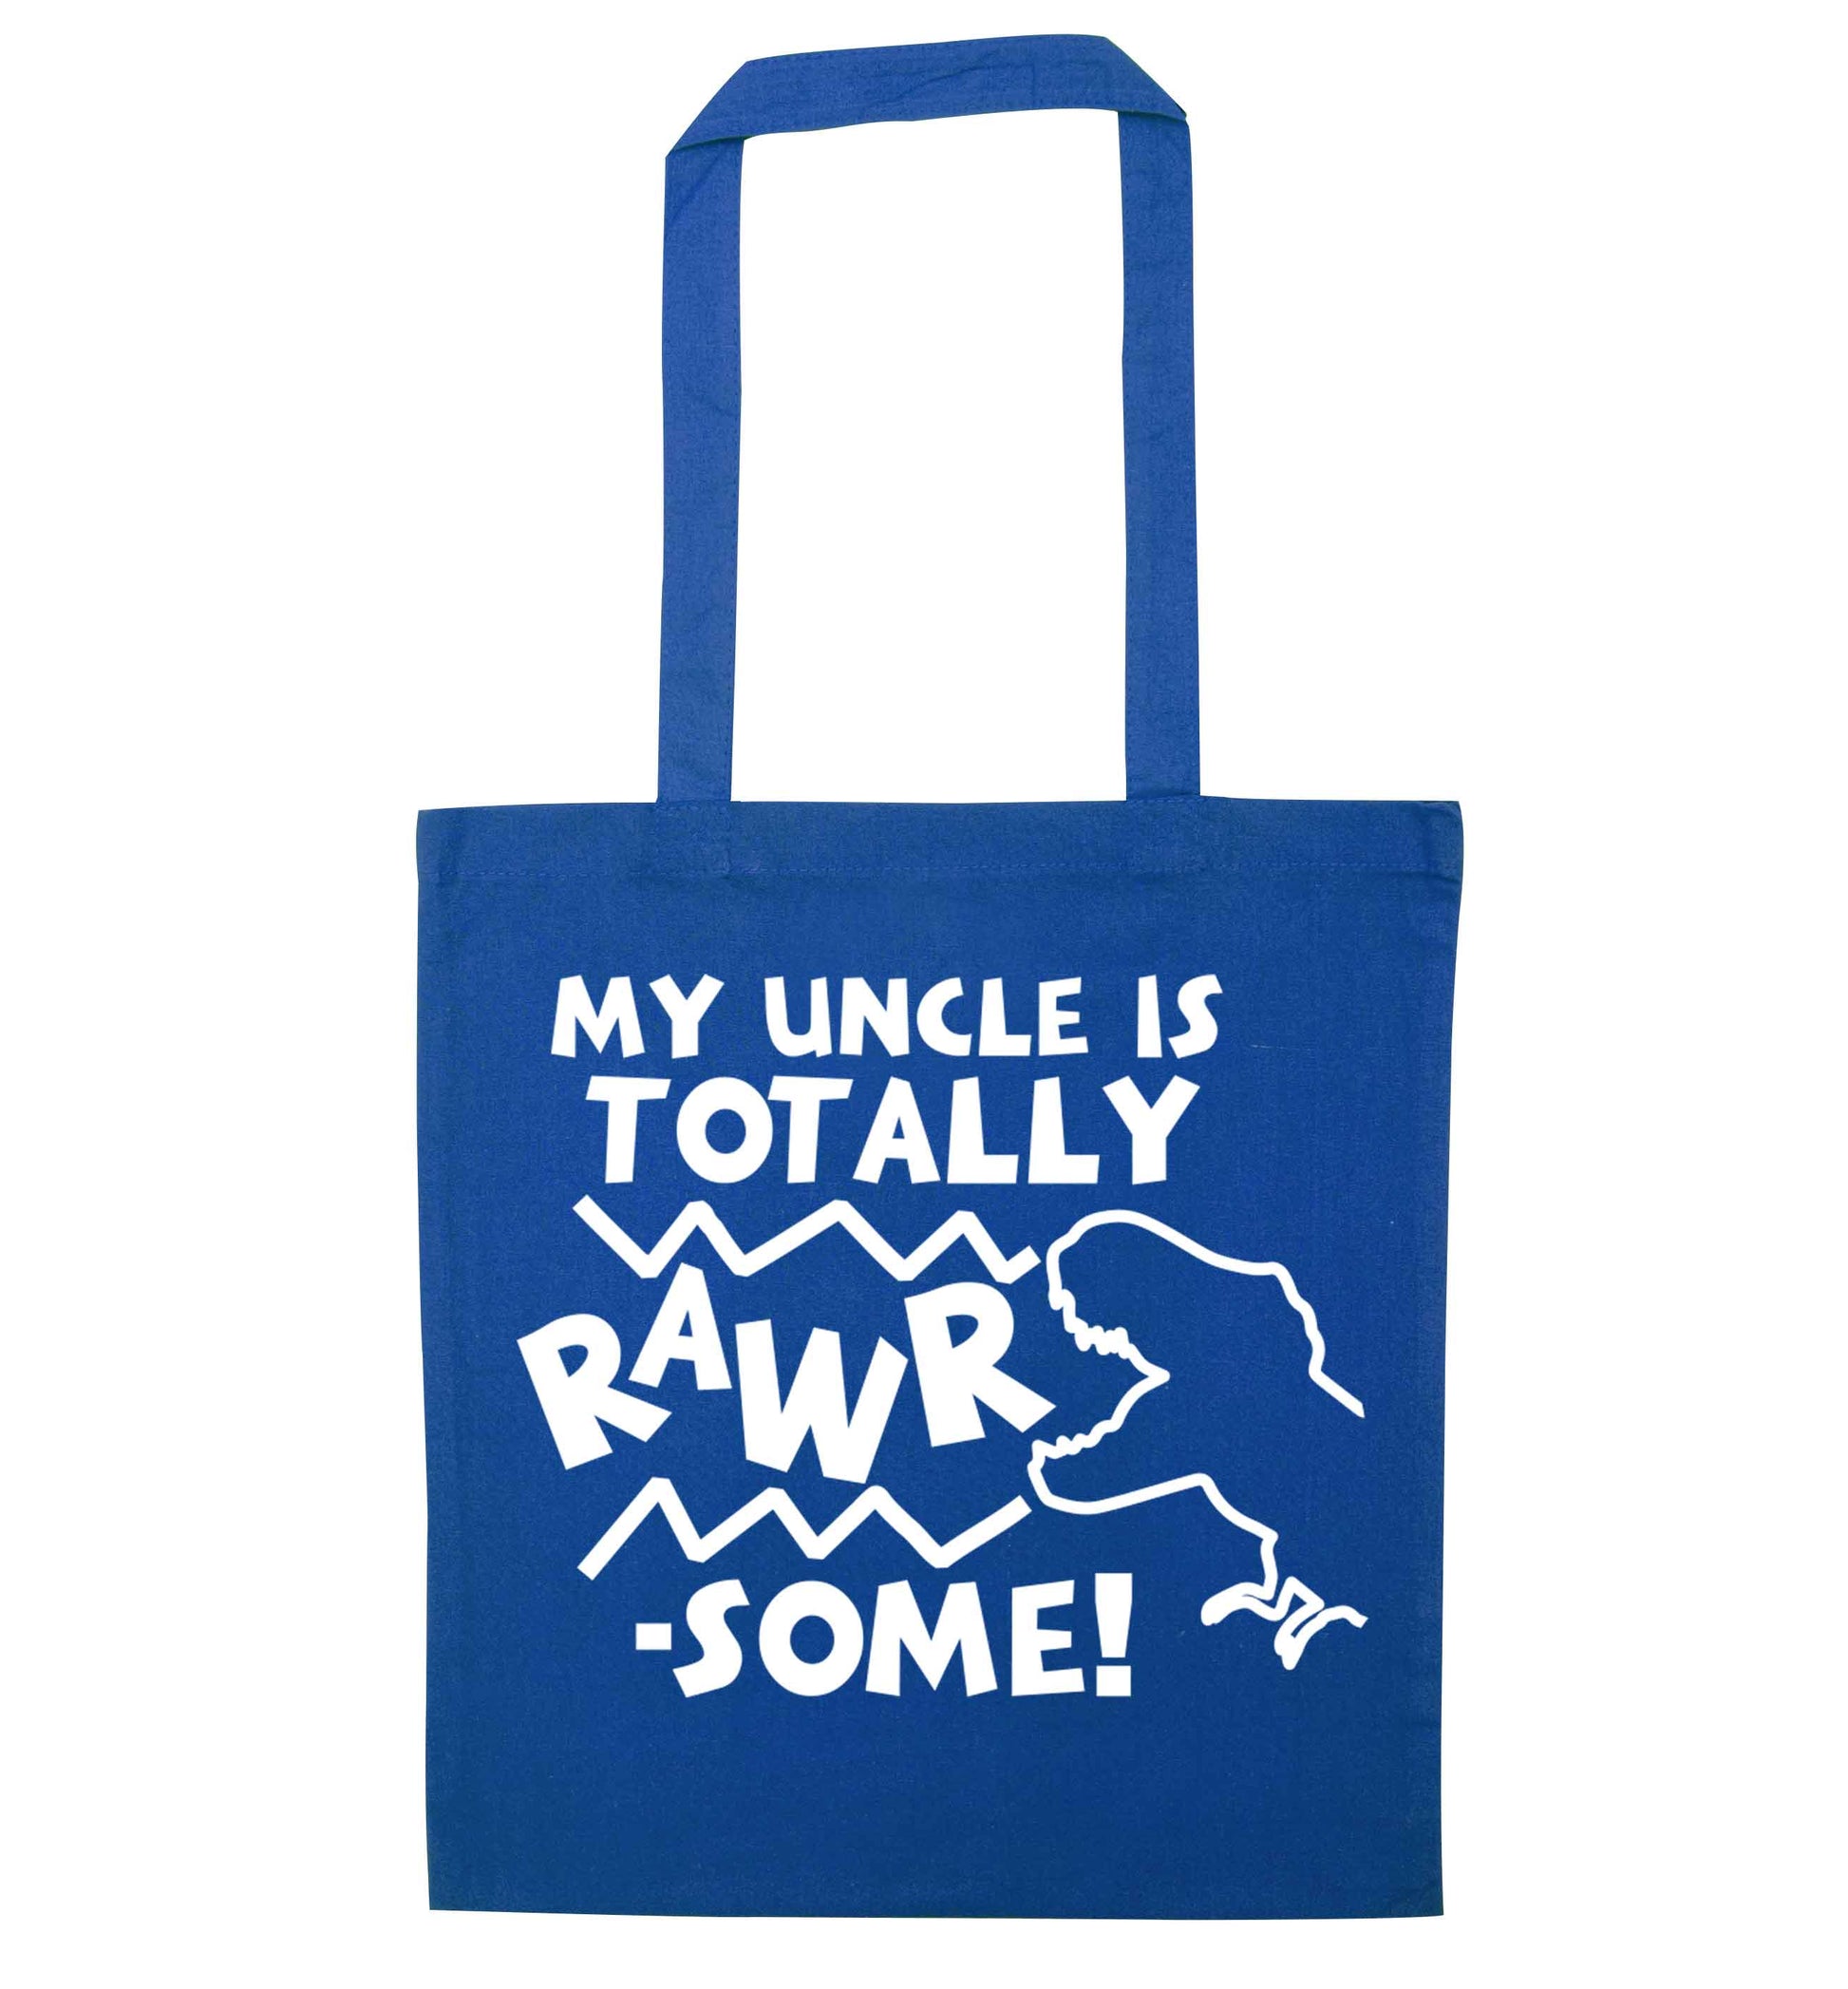 My uncle is totally rawrsome blue tote bag